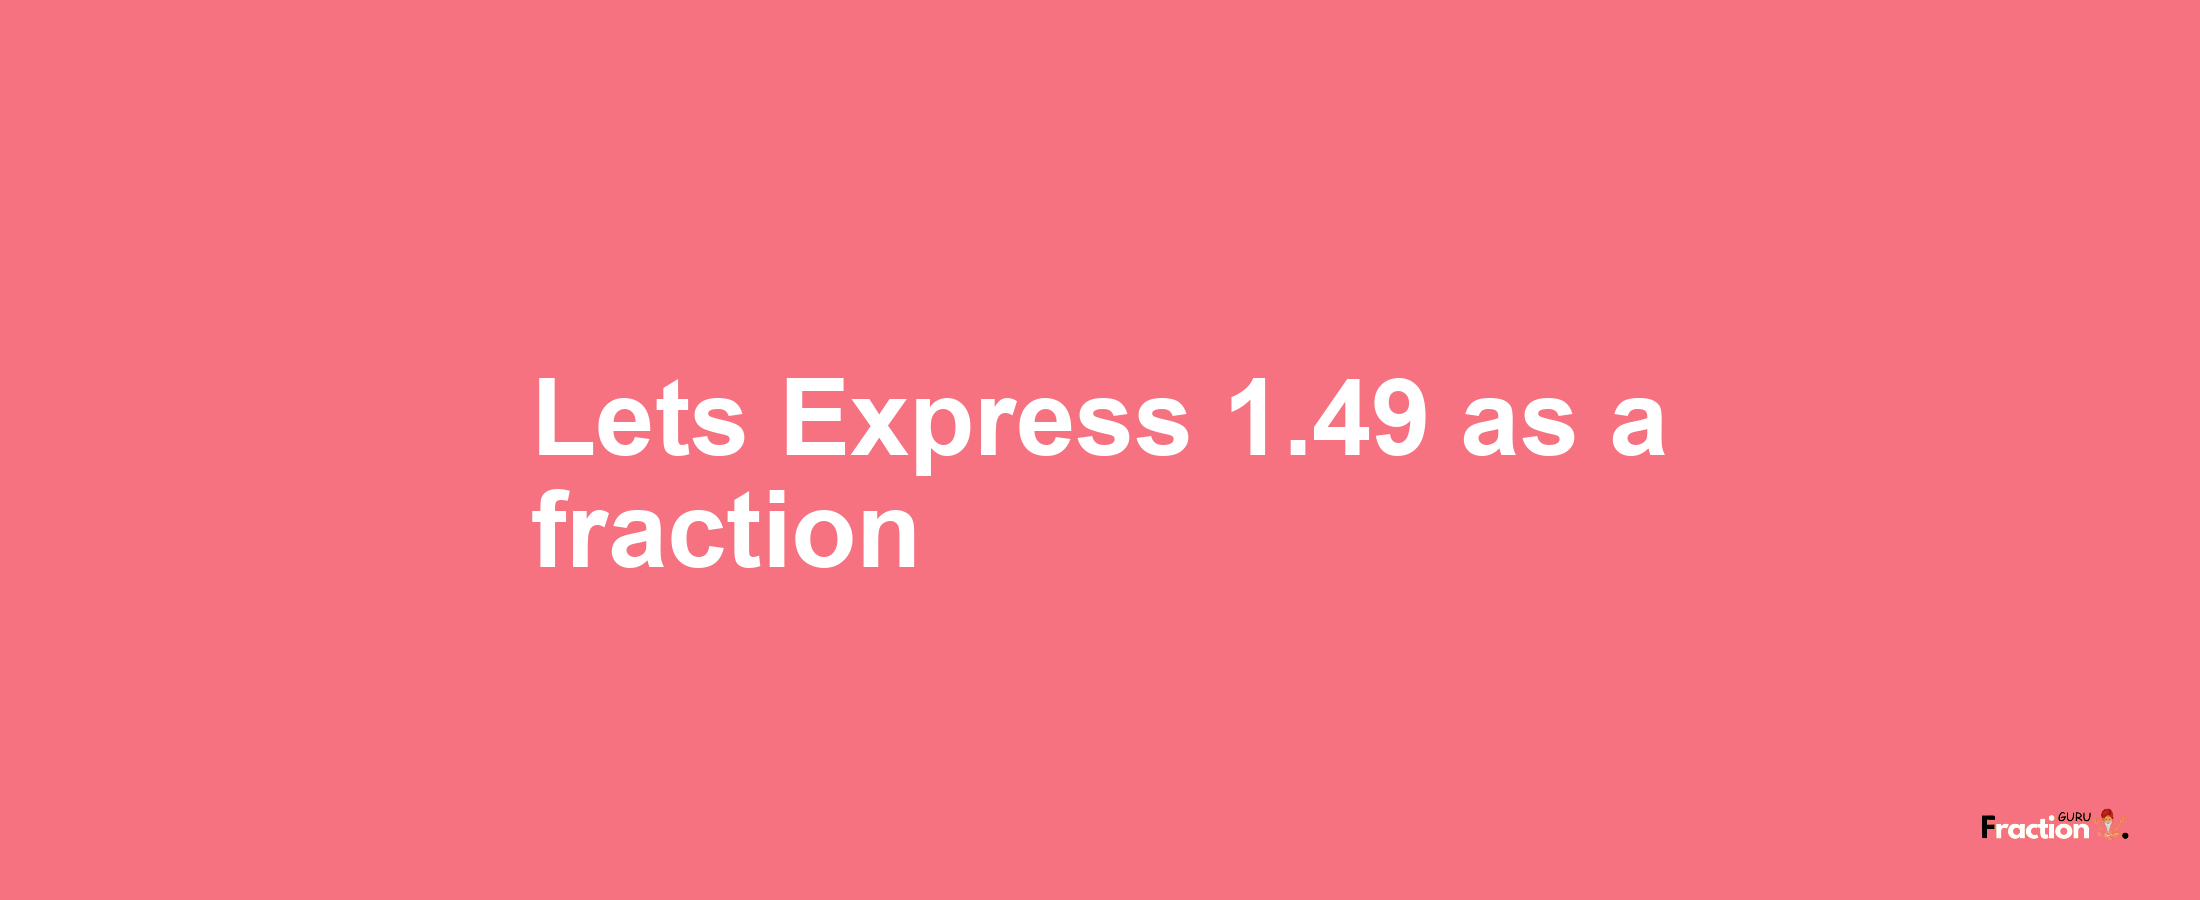 Lets Express 1.49 as afraction